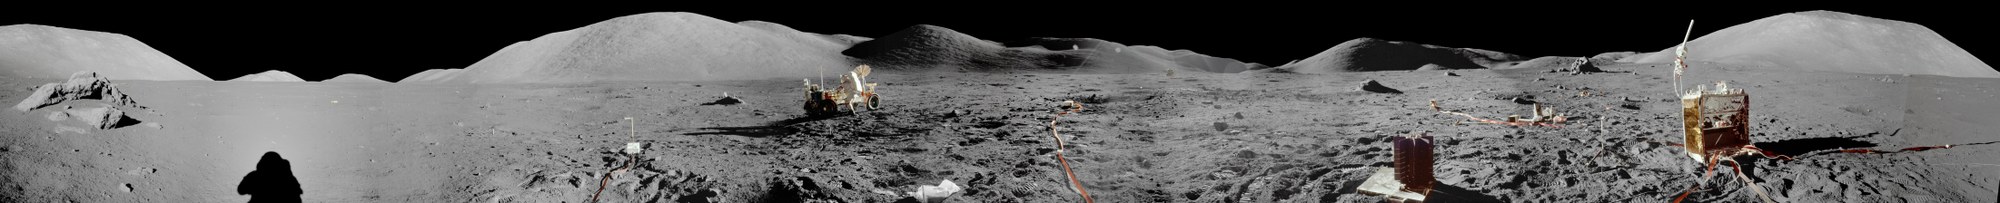 Experiments carried out during Apollo 17